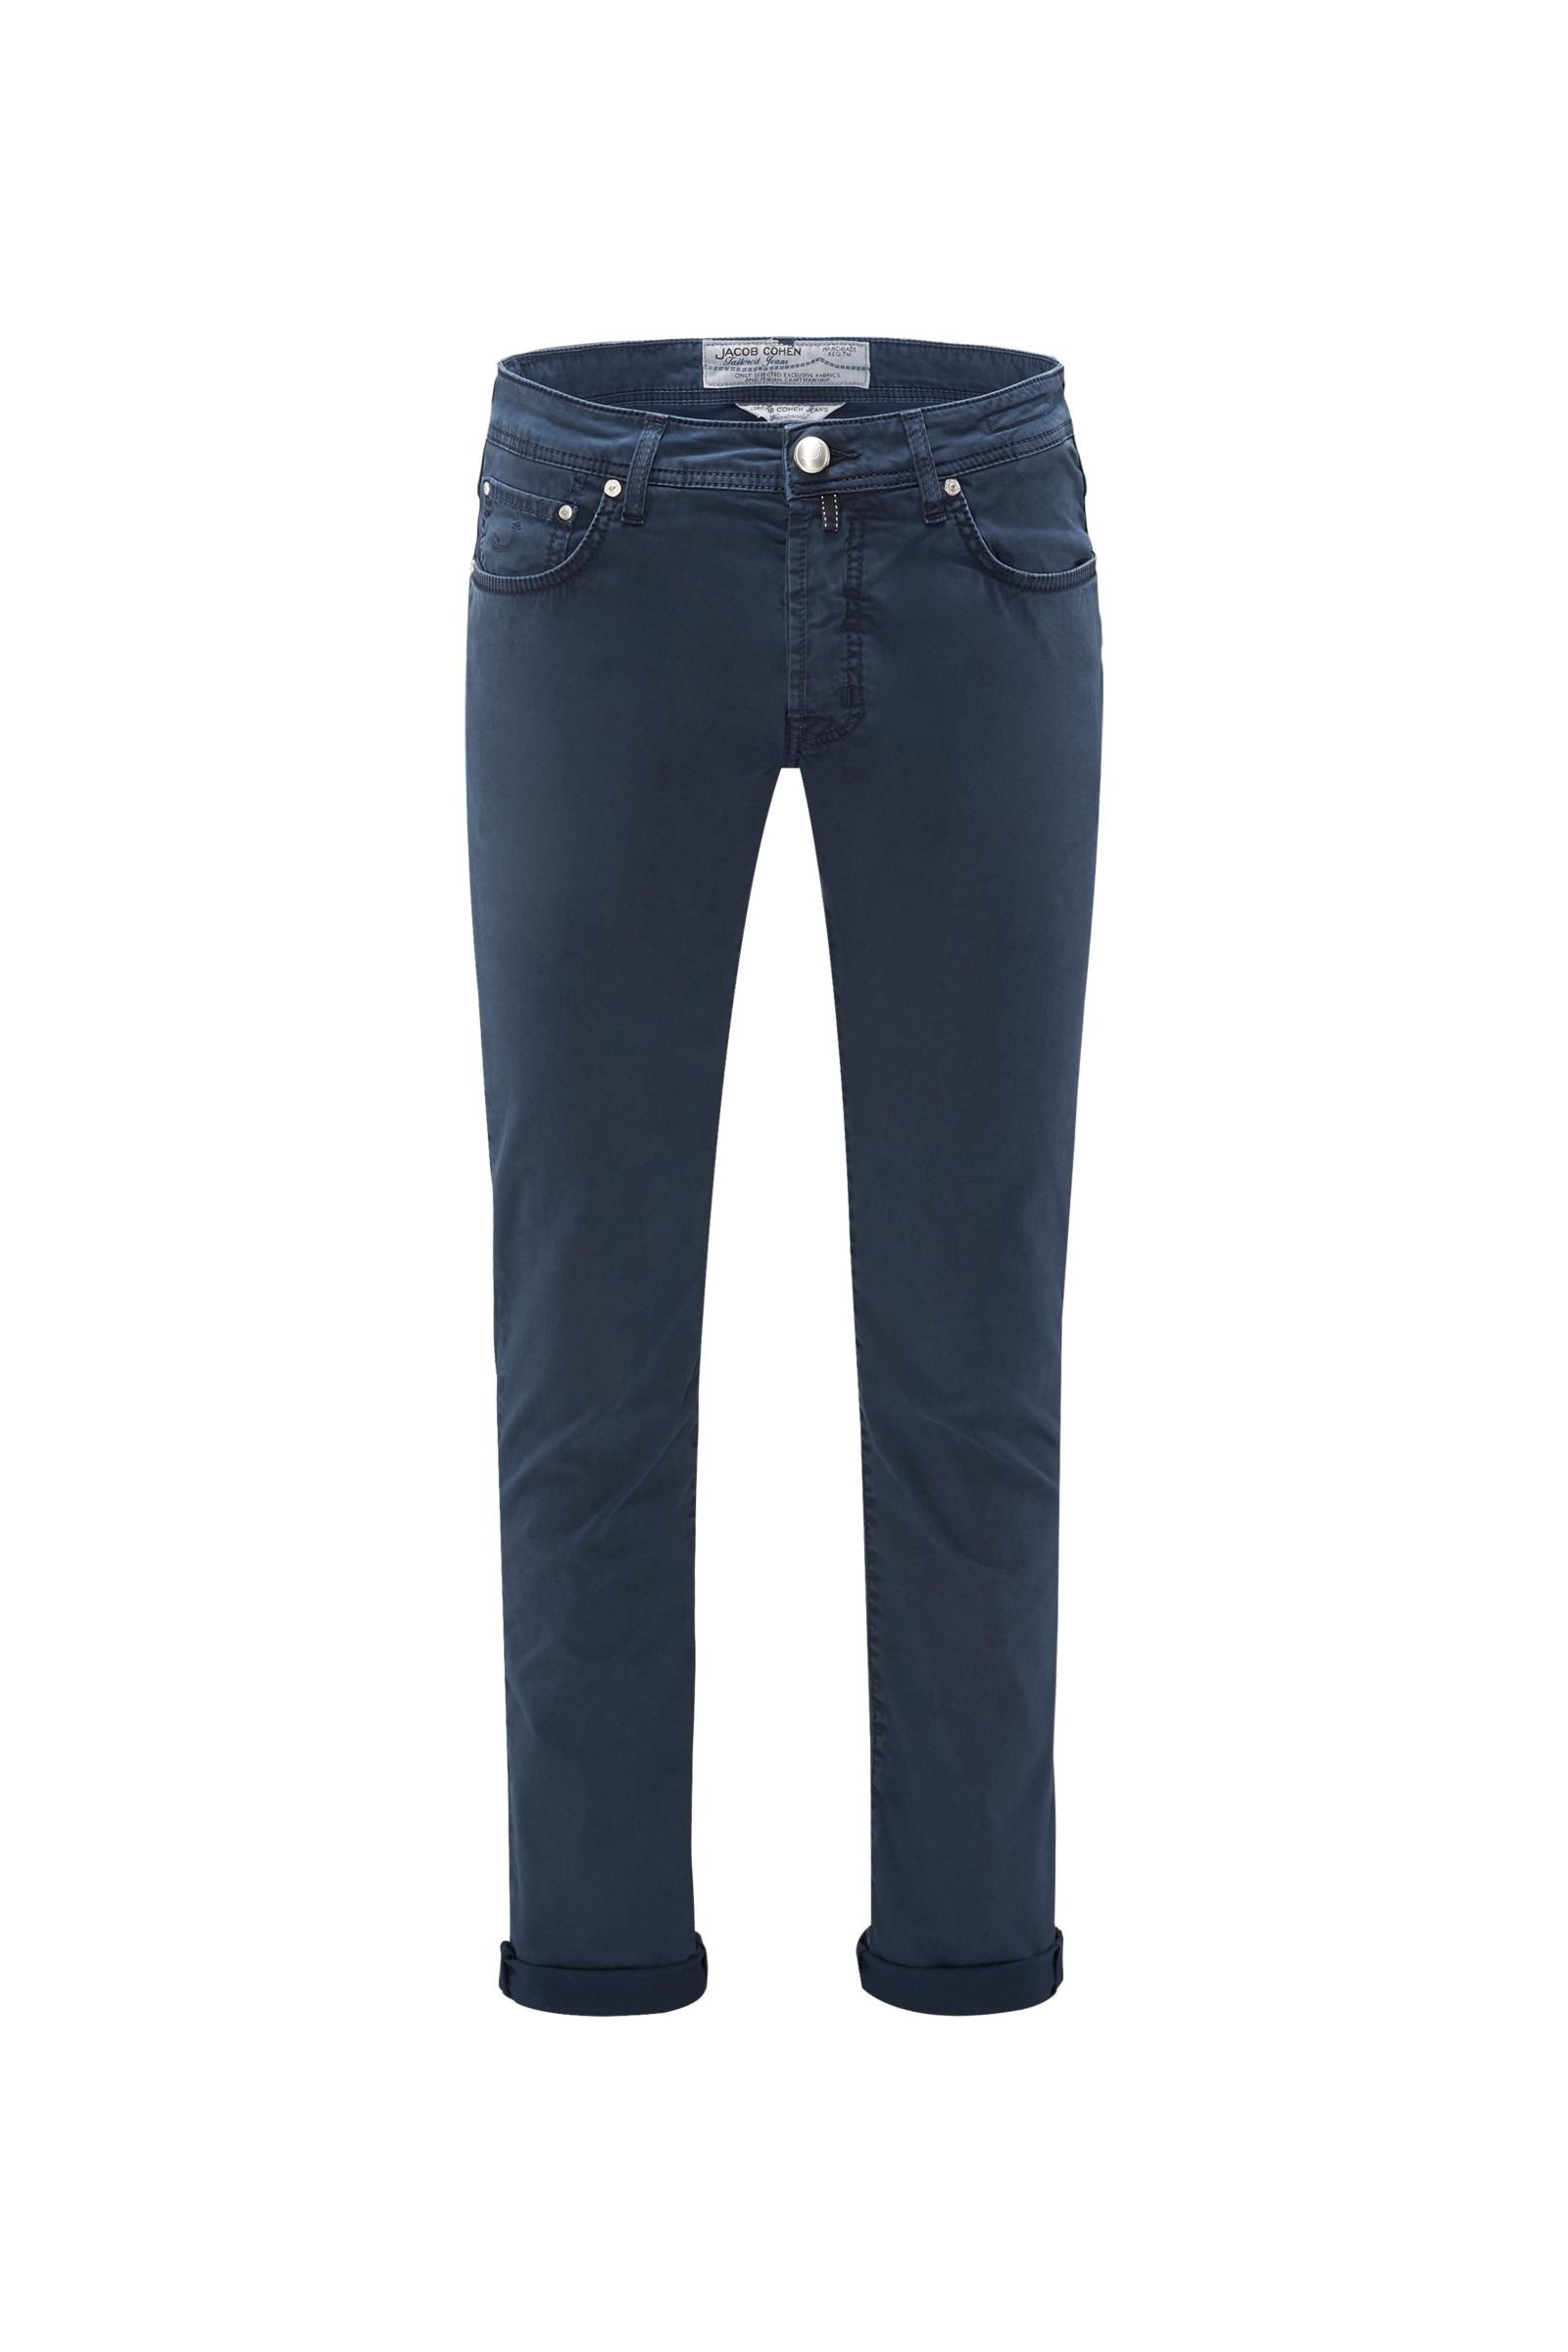 Cotton trousers 'PW688 Comfort' navy